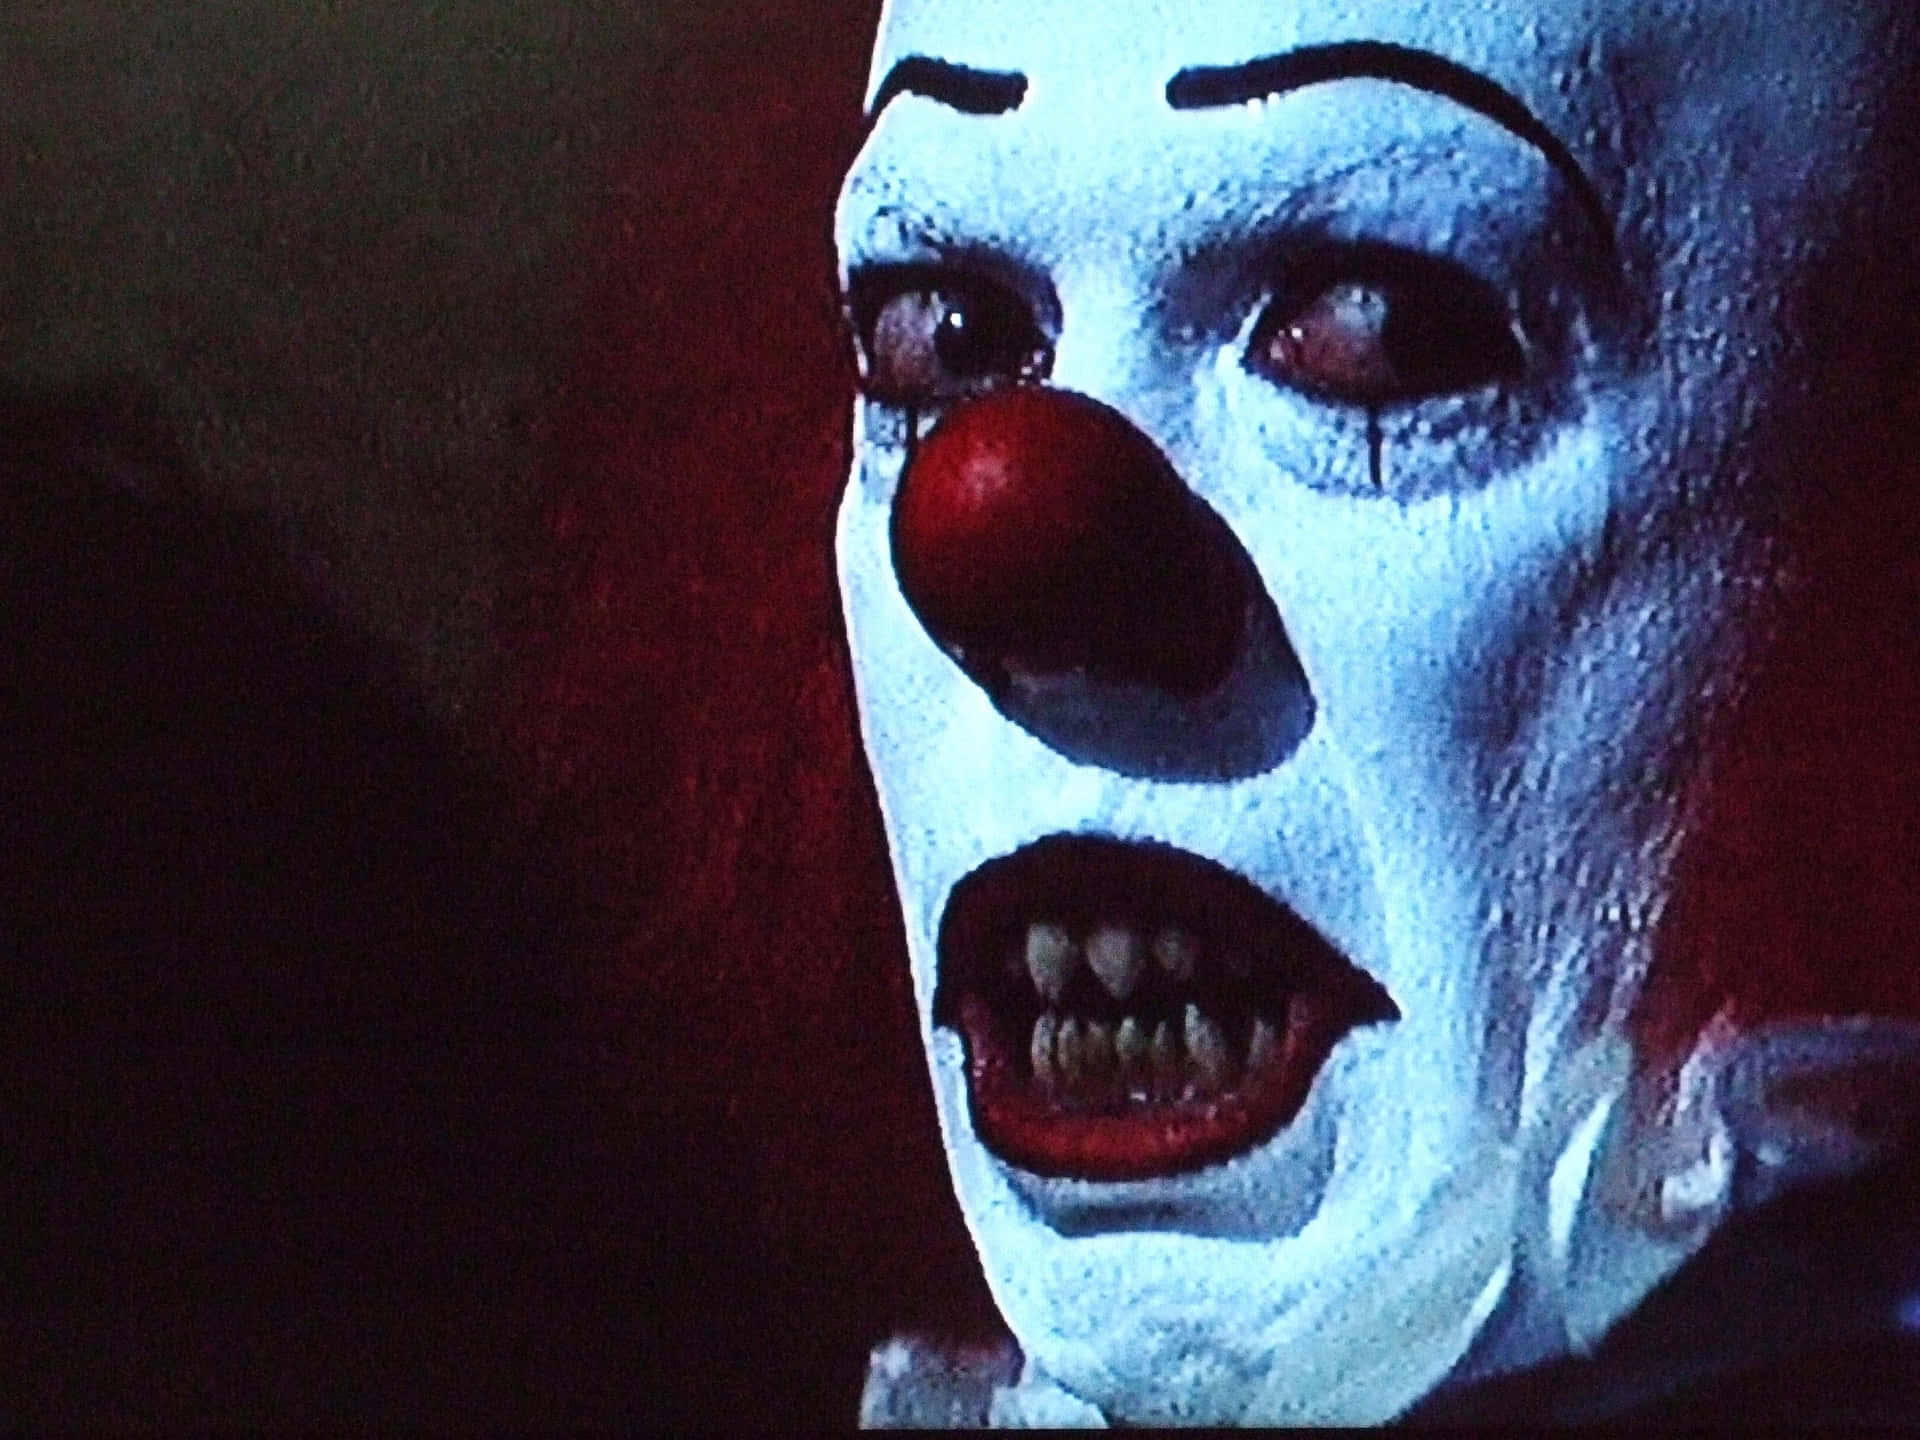 Imagensdo Pennywise.